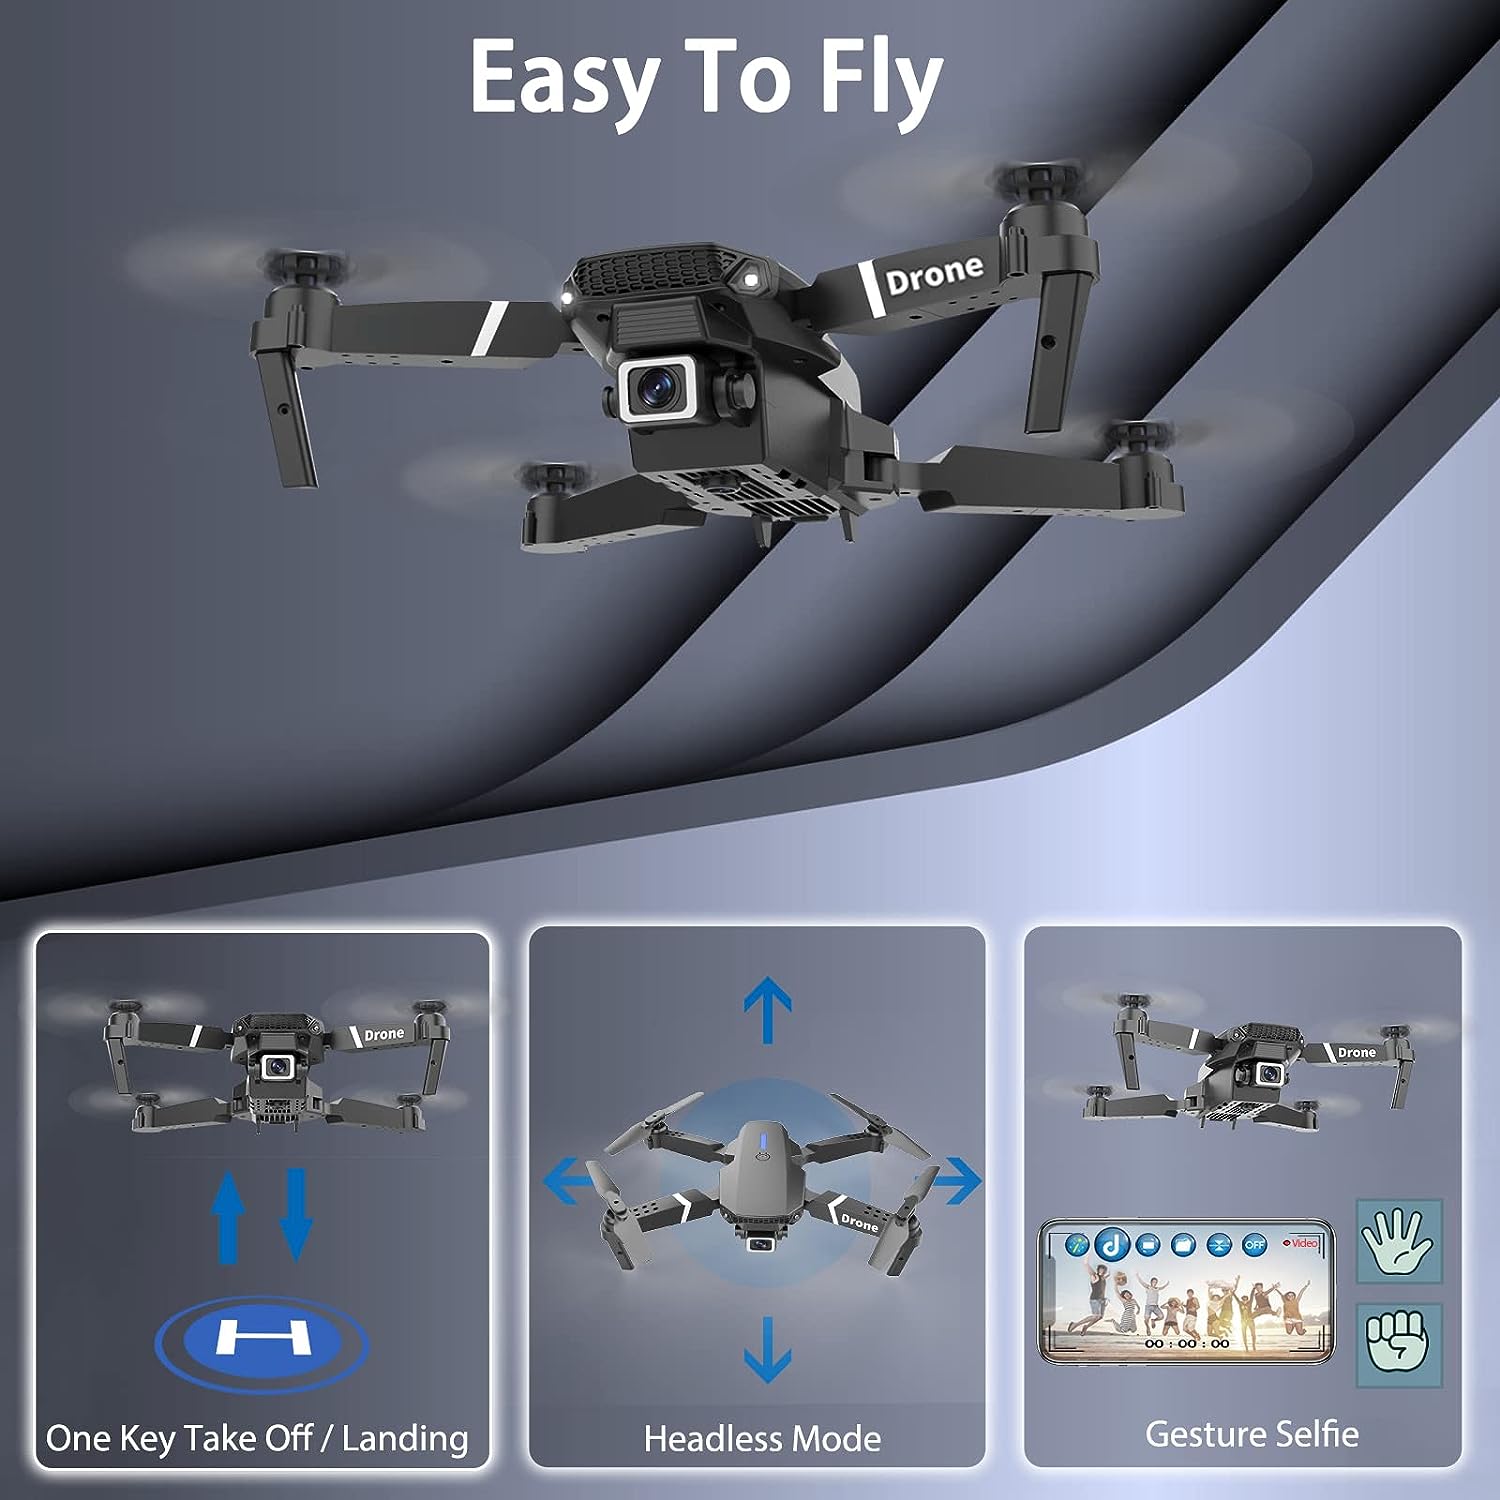 Drones-Foldable-Drone-with-Camera-Drone-with-Obstacle-Avoidance-4K-1080P-Live-Video-RC-Quadcopter-Mini-Drone-Toy-For-Kids-Adults-3-Rechargeable-Batteries-30